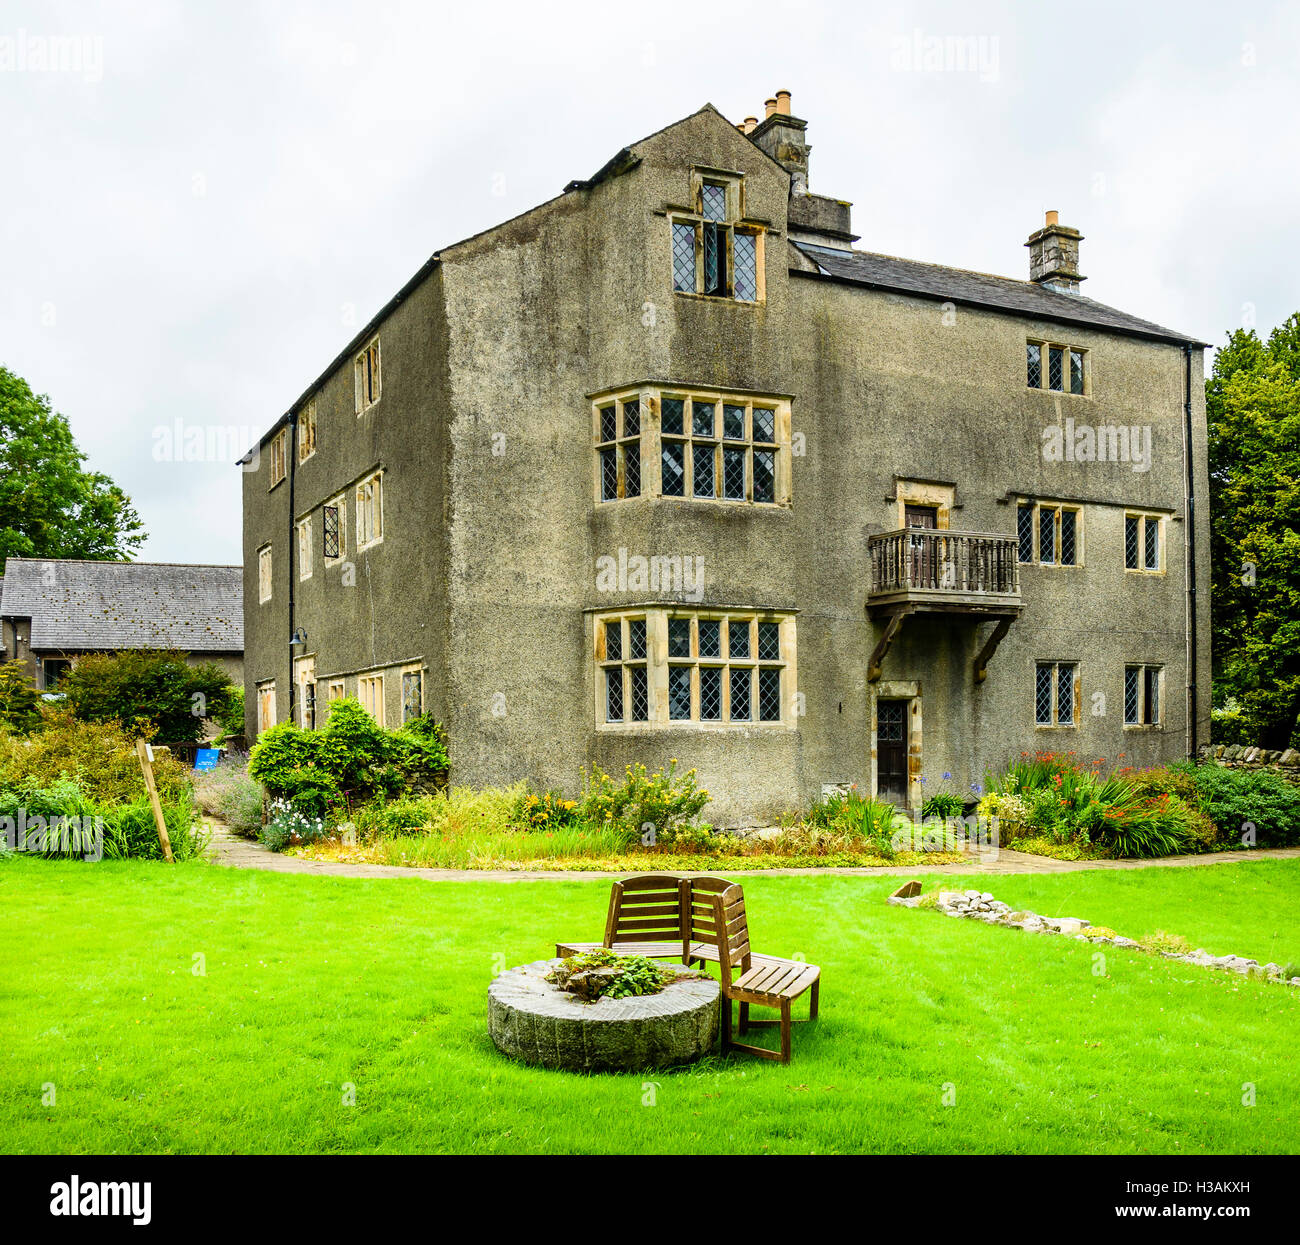 Swarthmoor Hall a 16th century manor house near Ulverston Cumbria England and important centre for the Quaker movement Stock Photo